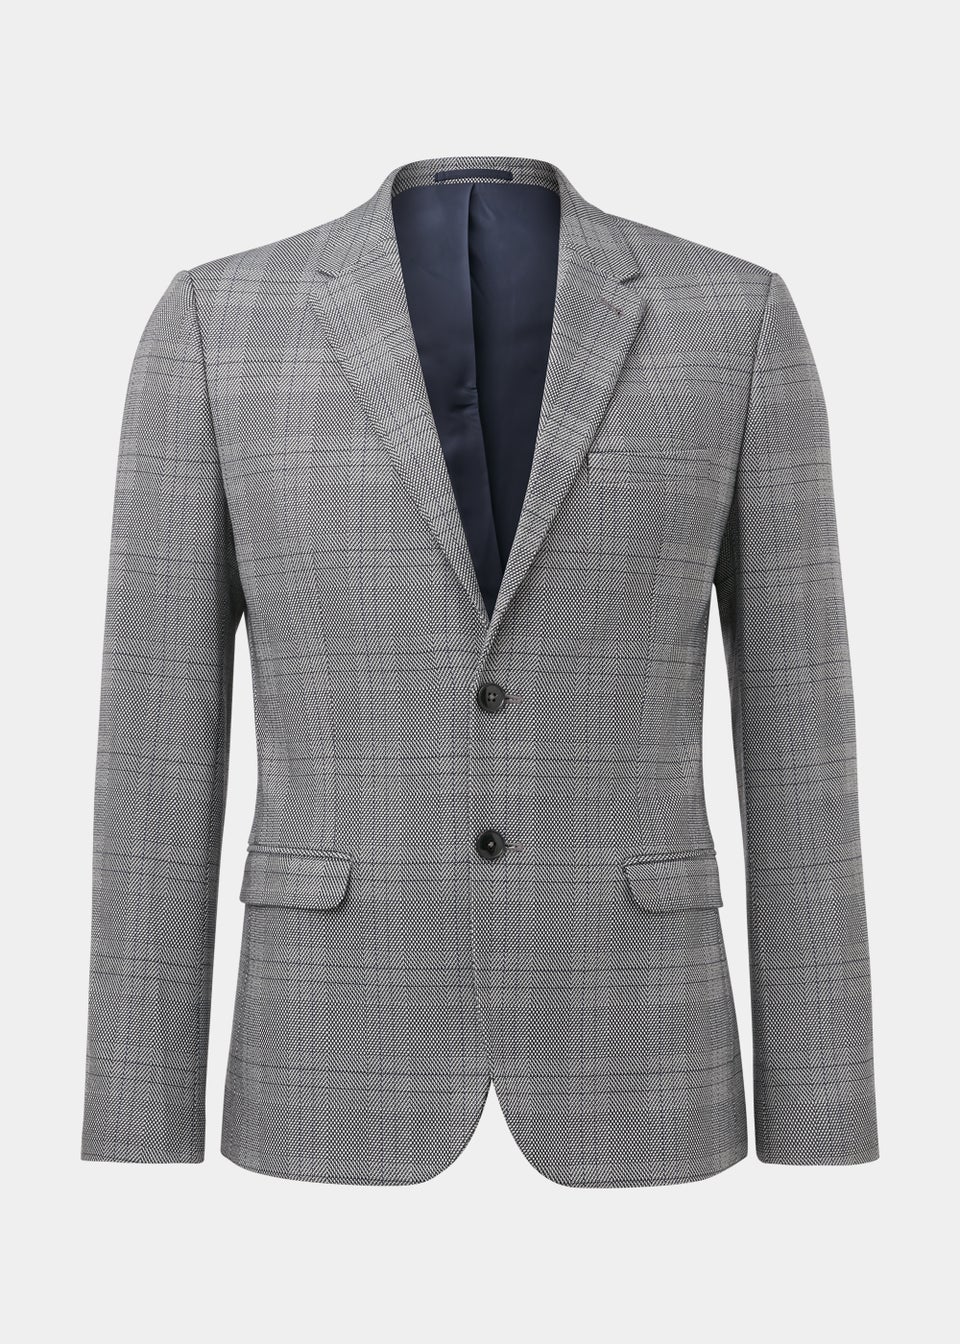 Taylor & Wright Forth Grey Check Skinny Fit Suit Jacket - Matalan